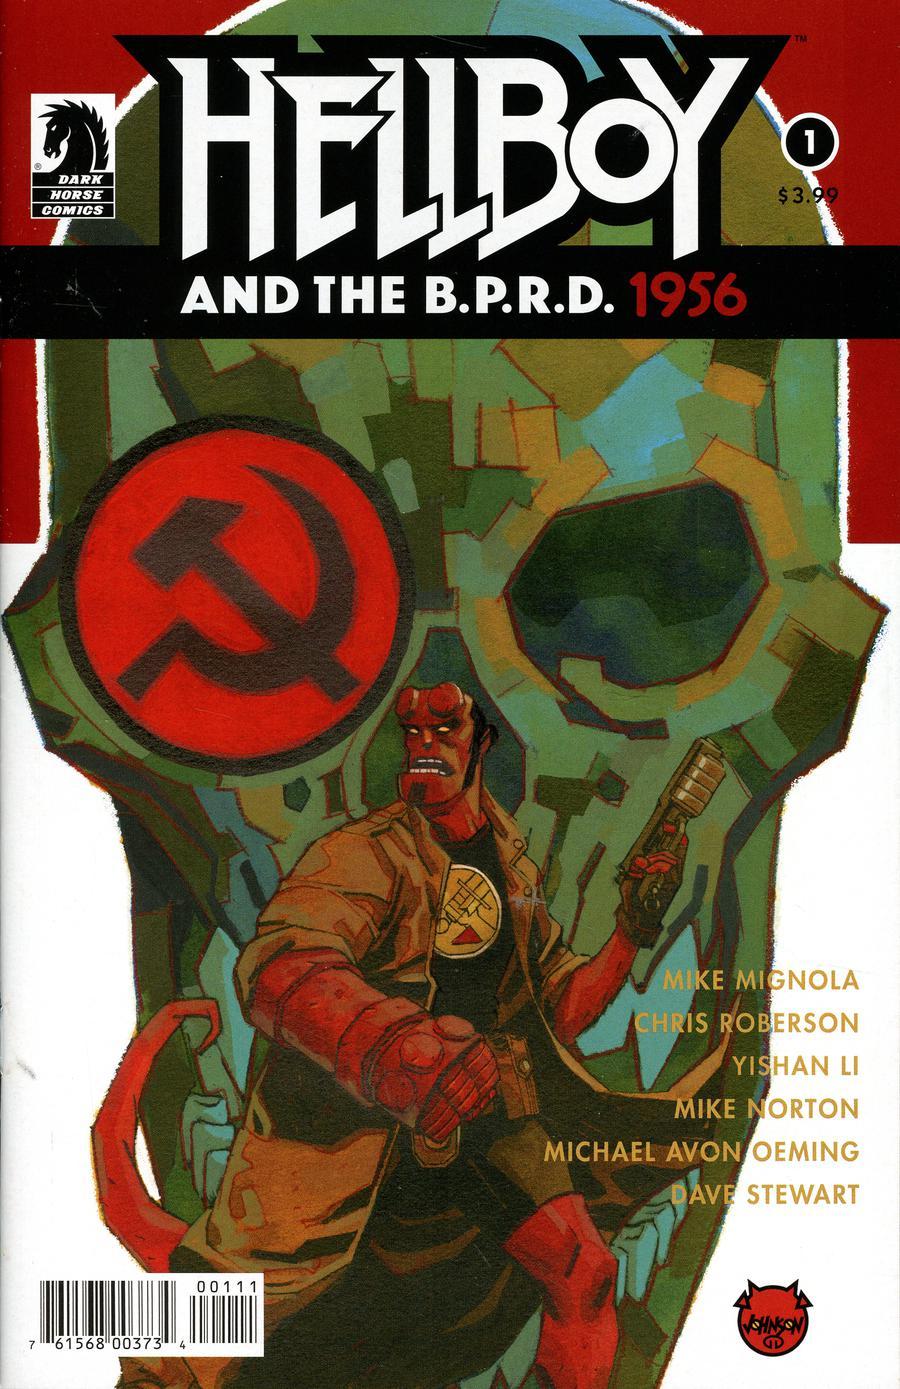 Hellboy And The BPRD 1956 Vol. 1 #1